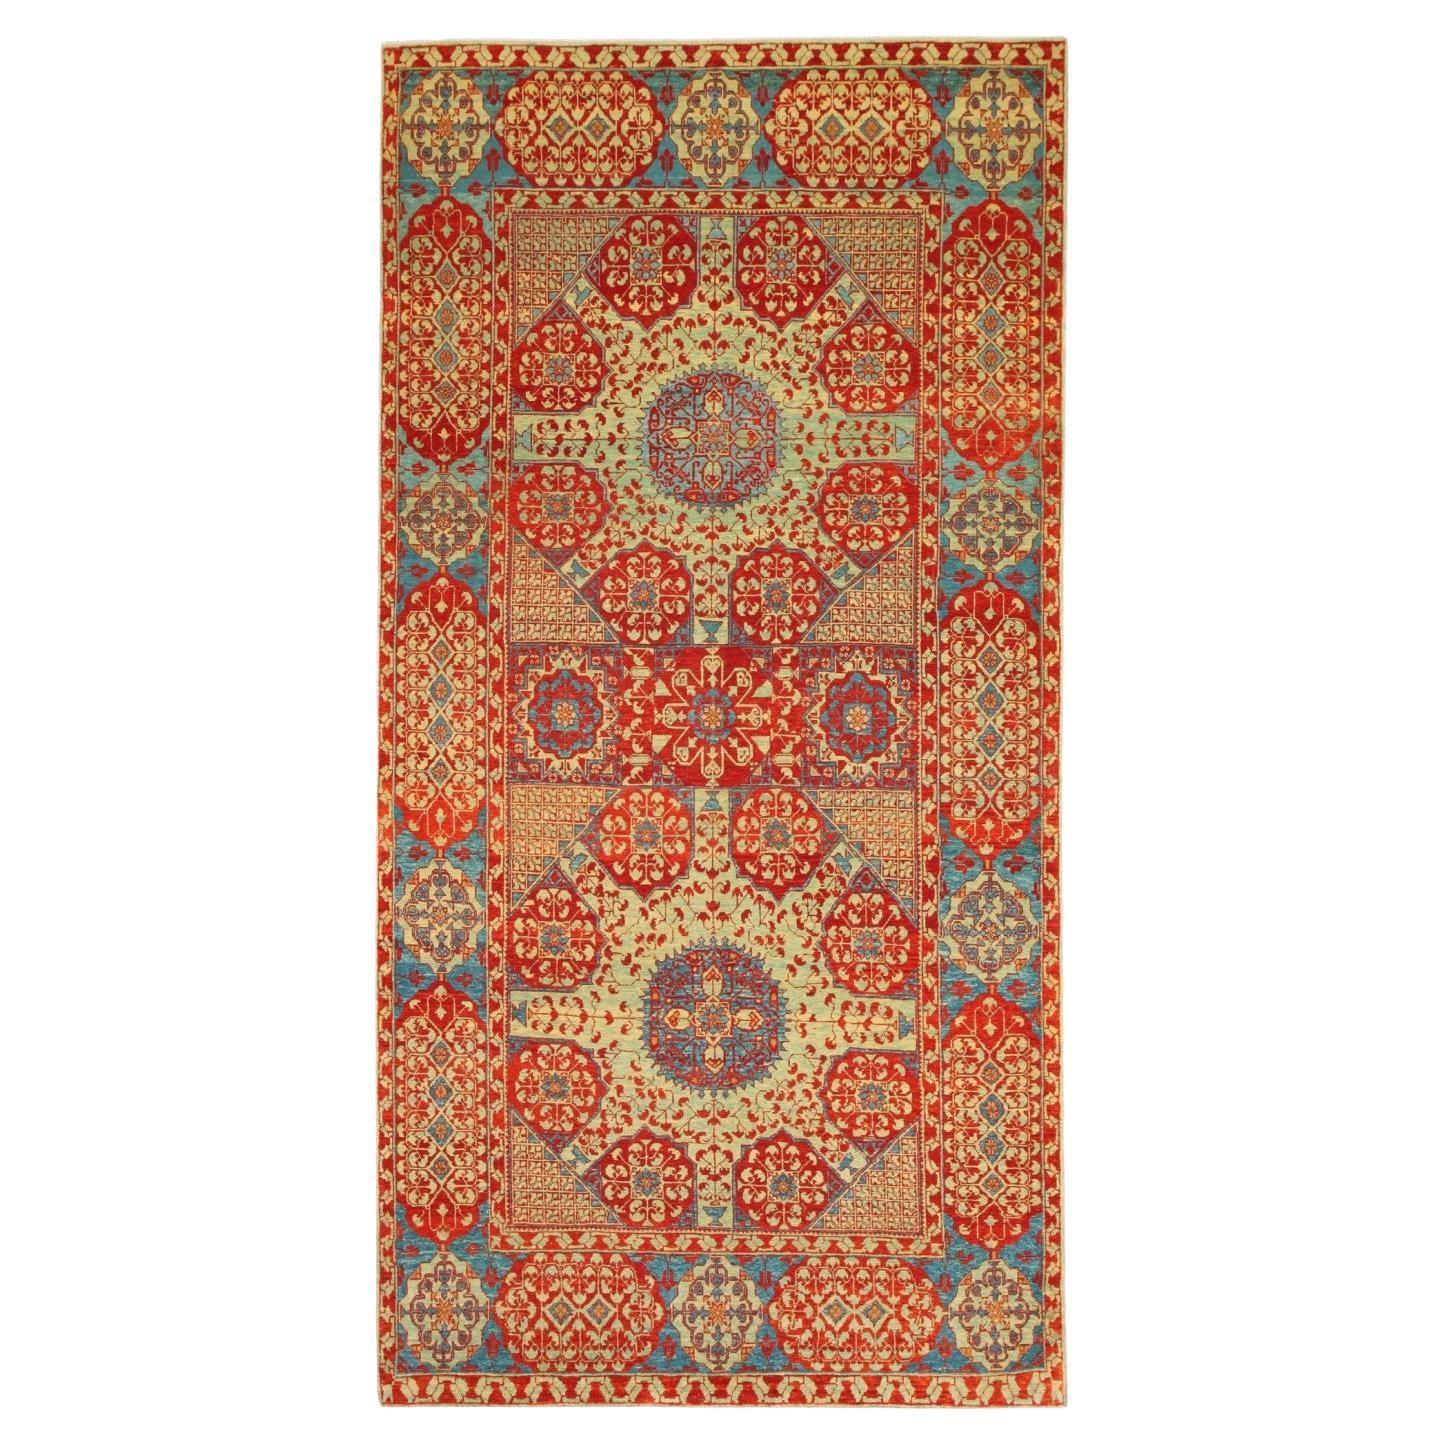 Ararat Rugs Mamluk Carpet with Cup Motif, Antique Revival Rug, Natural Dyed For Sale